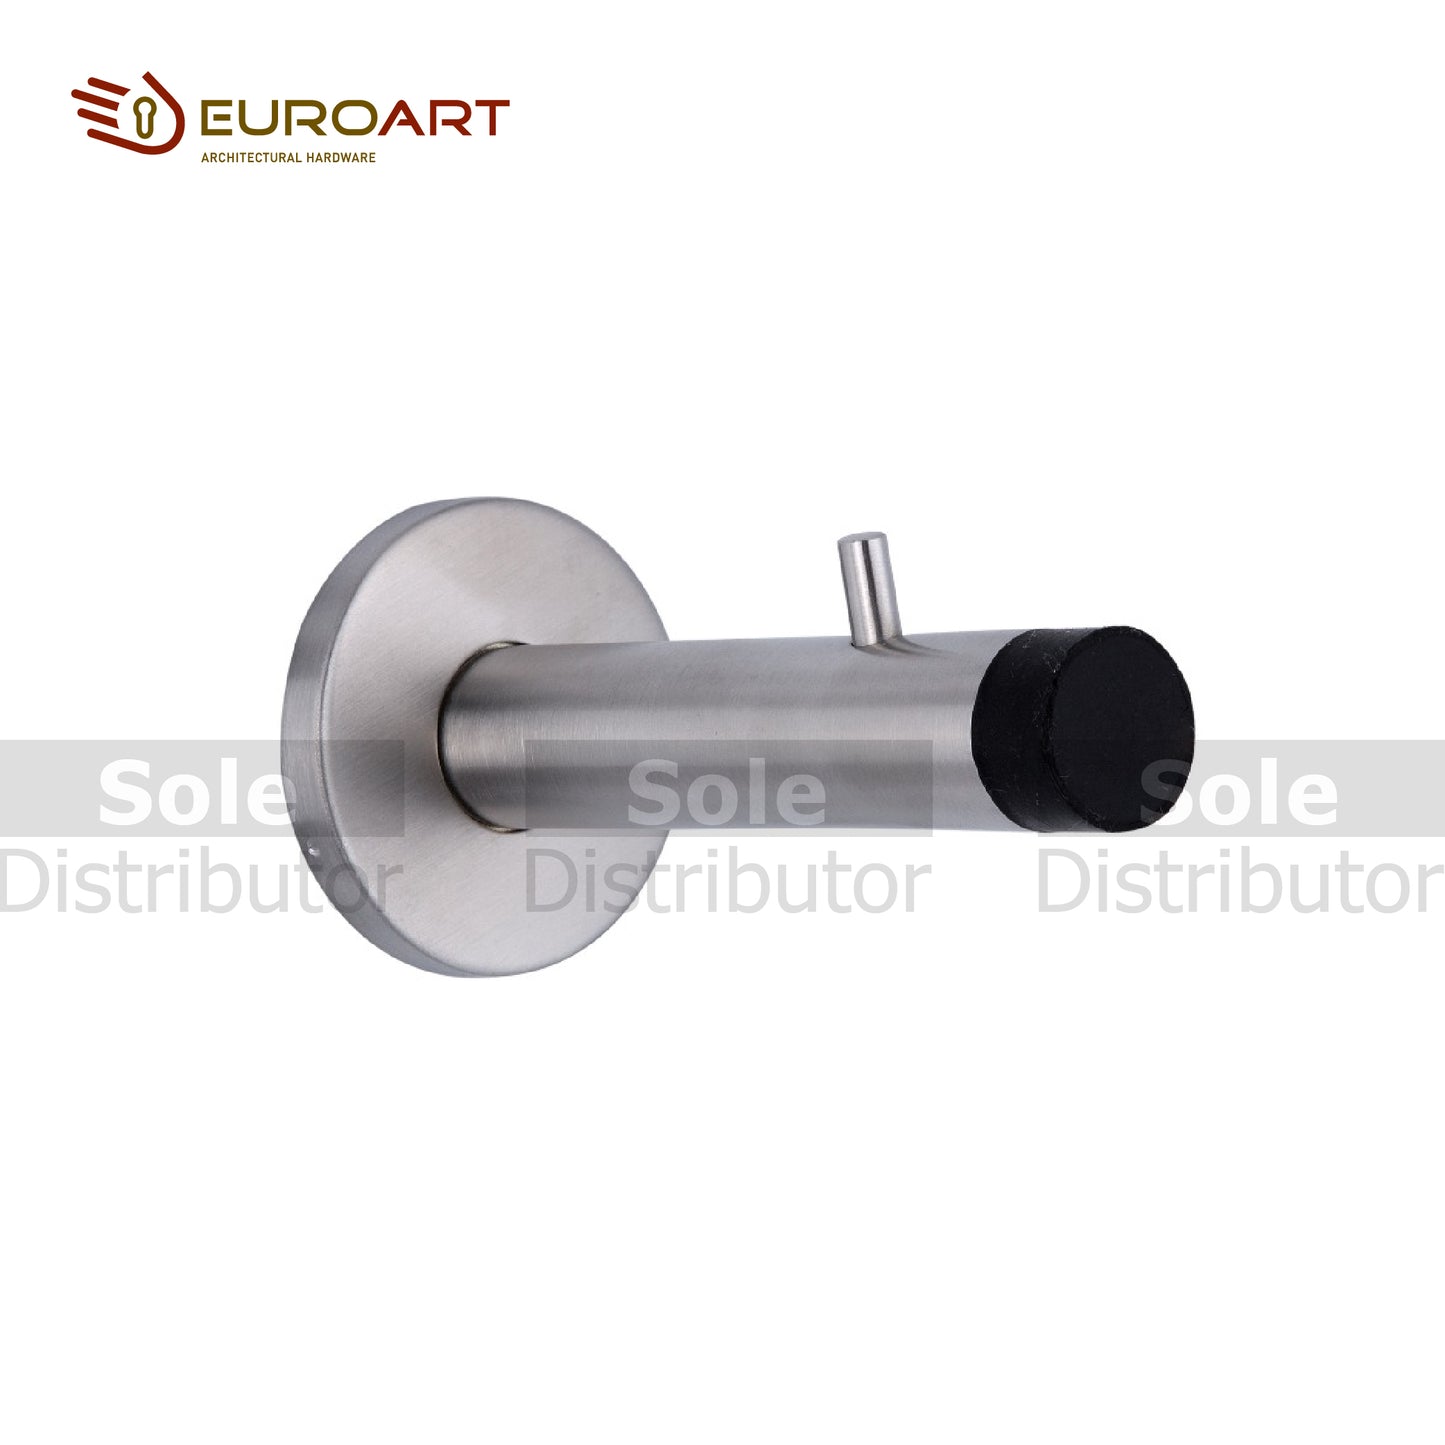 Euroart Wall Mounted Door Stopper with Pin Stainless Steel Finish - DSS207SSS